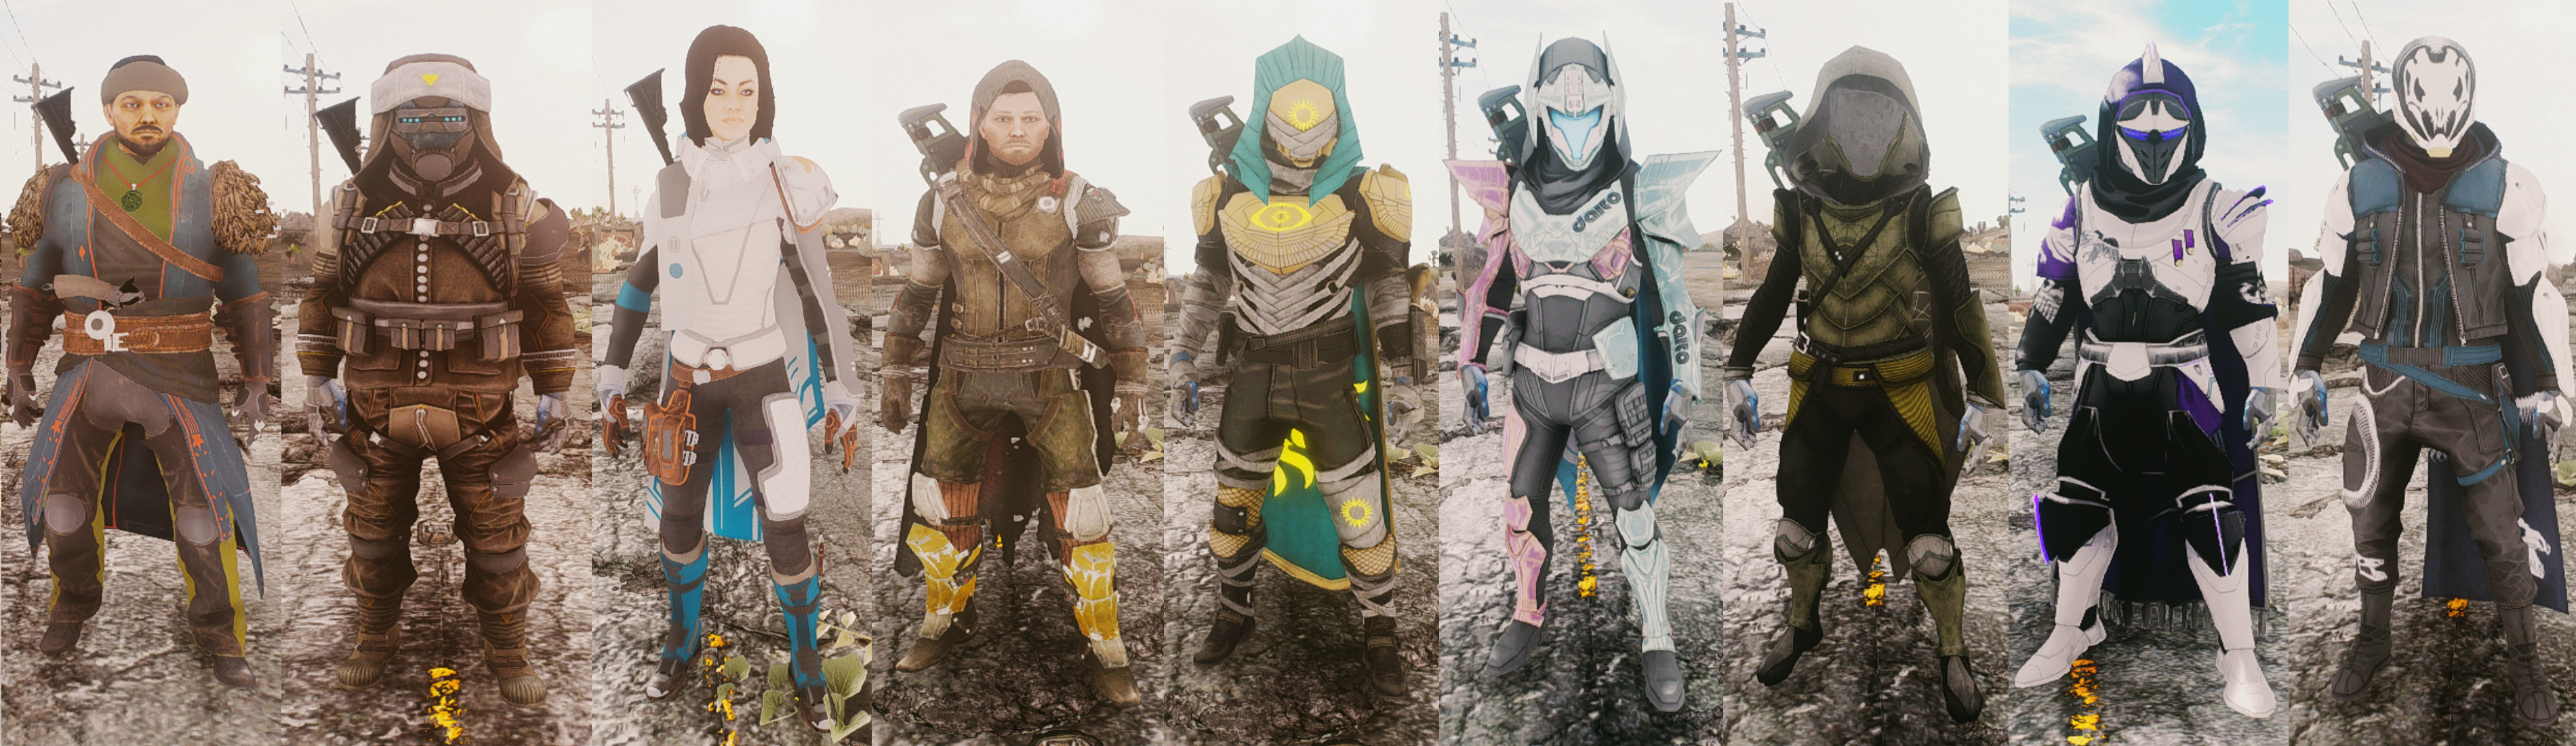 Fallout New Vegas: Destiny 2 Pack Update by Adventfather on DeviantArt